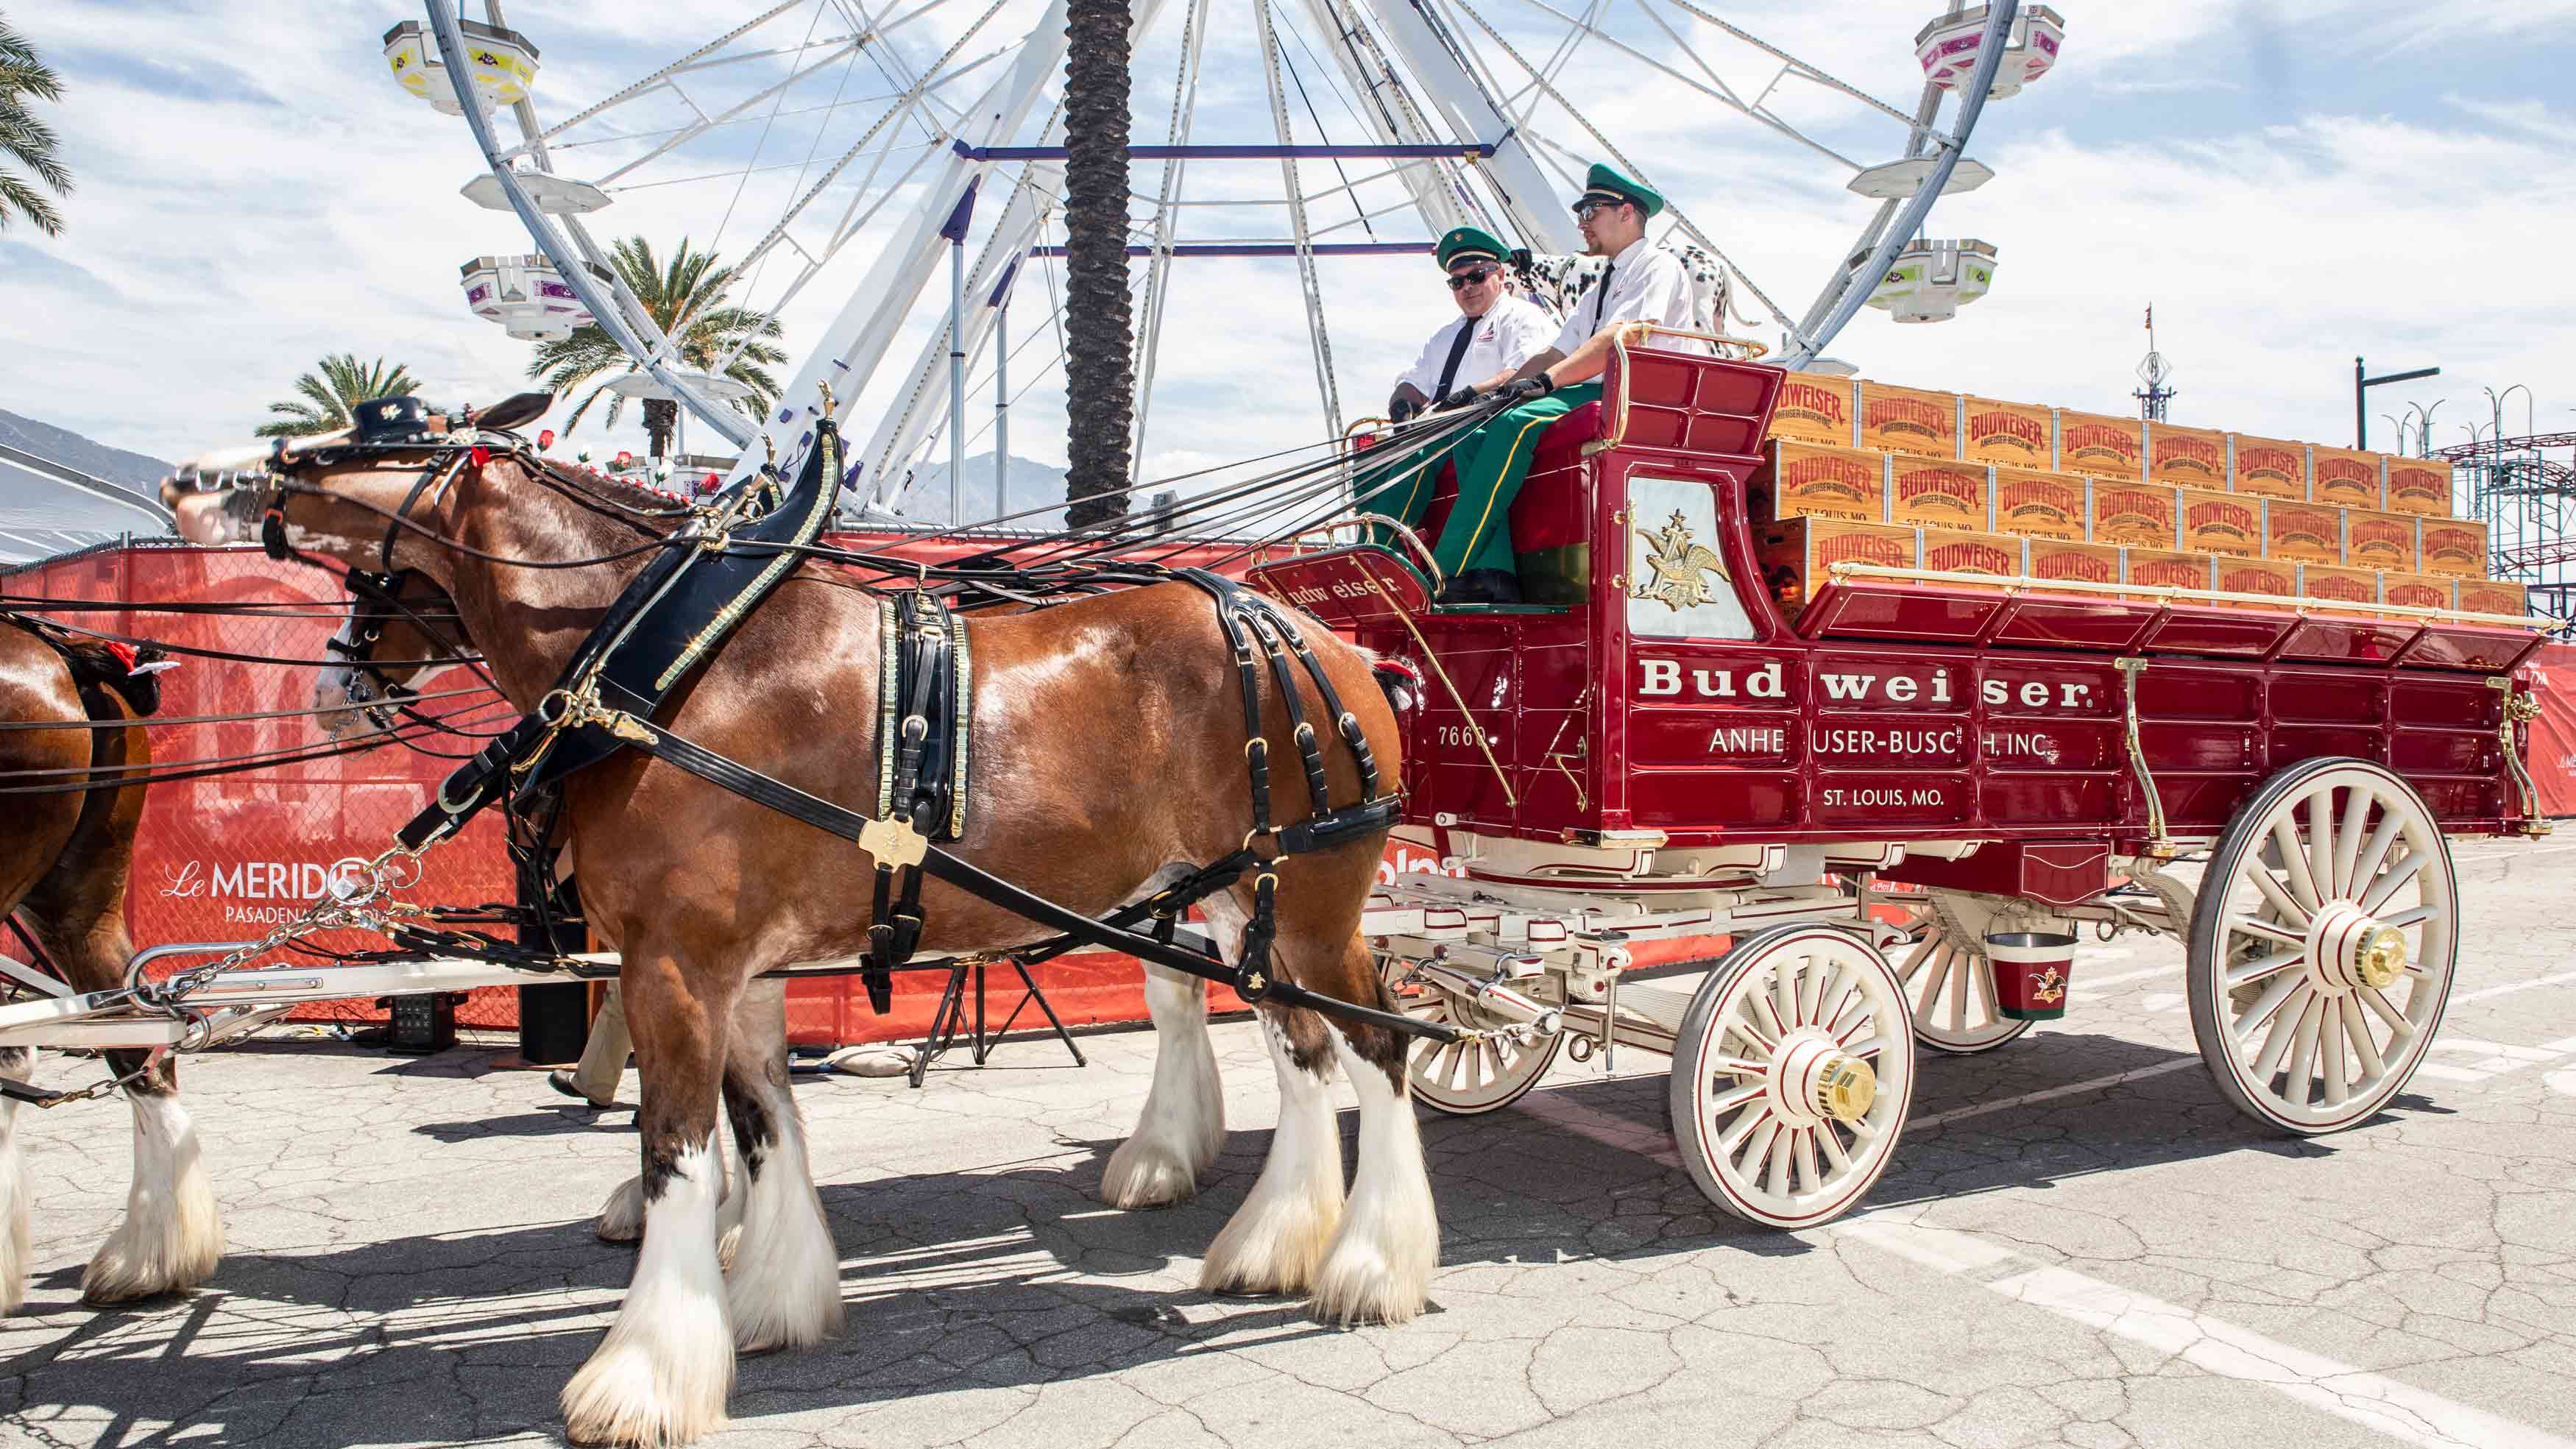 Budweiser Has Stopped Docking Tails of Its Iconic Clydesdale Horses